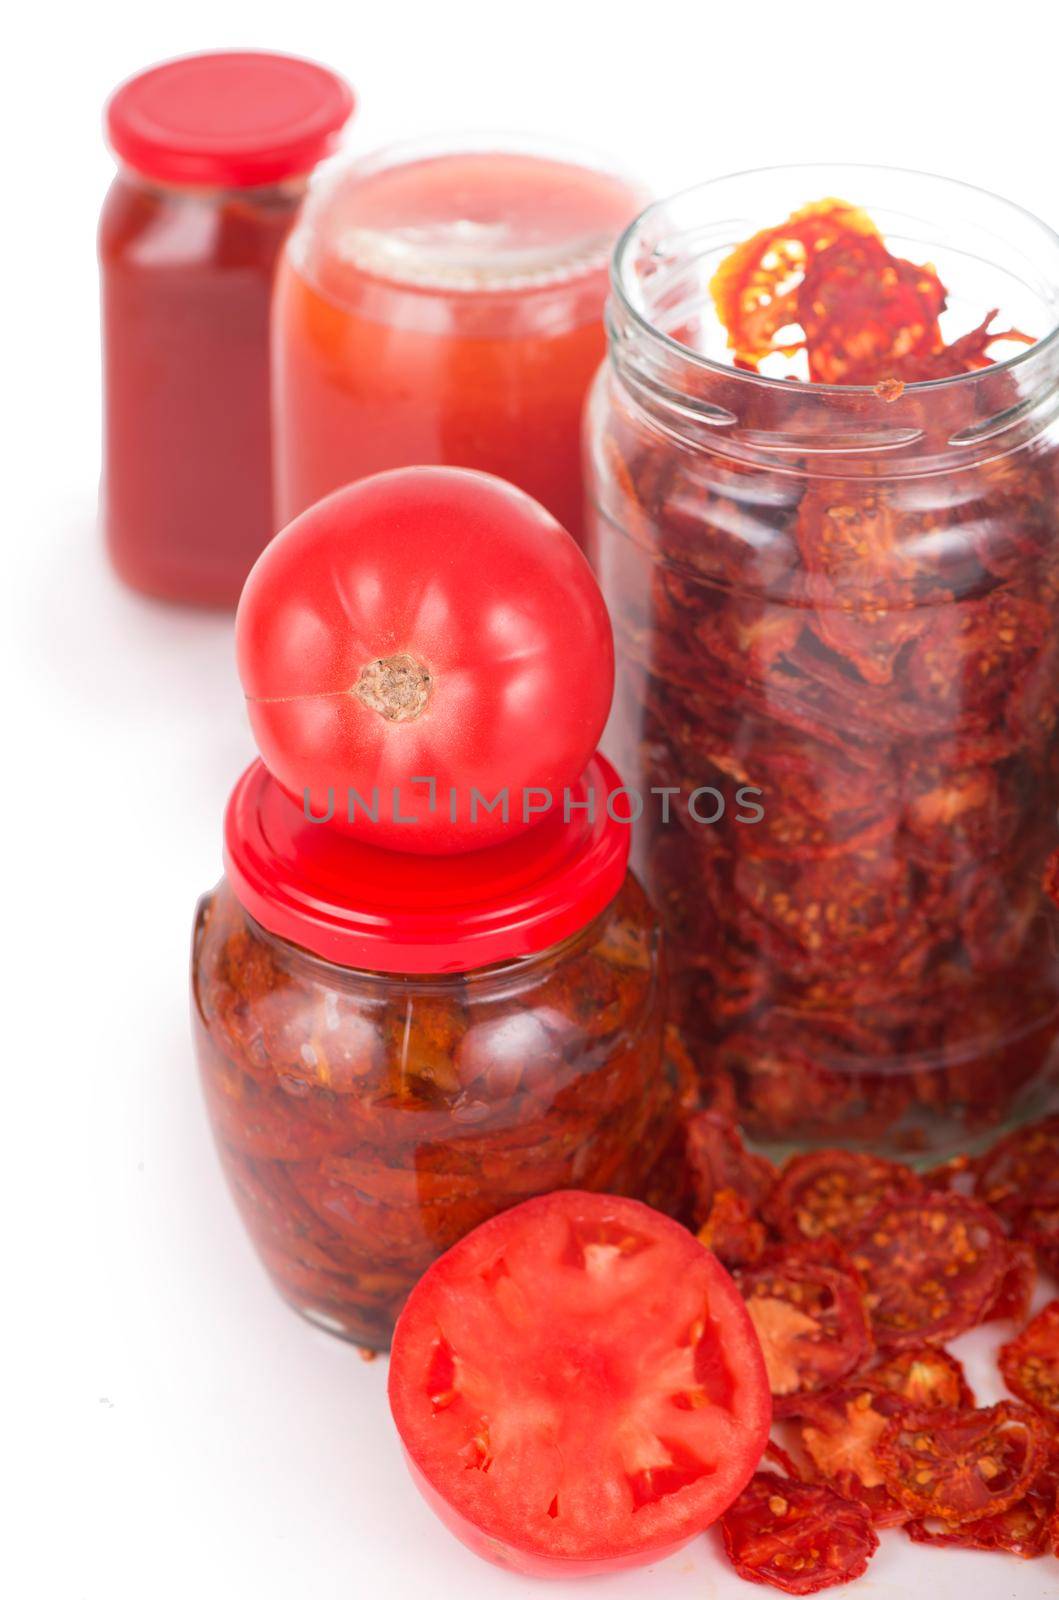 dried tomatoes on wooden background, top view by aprilphoto